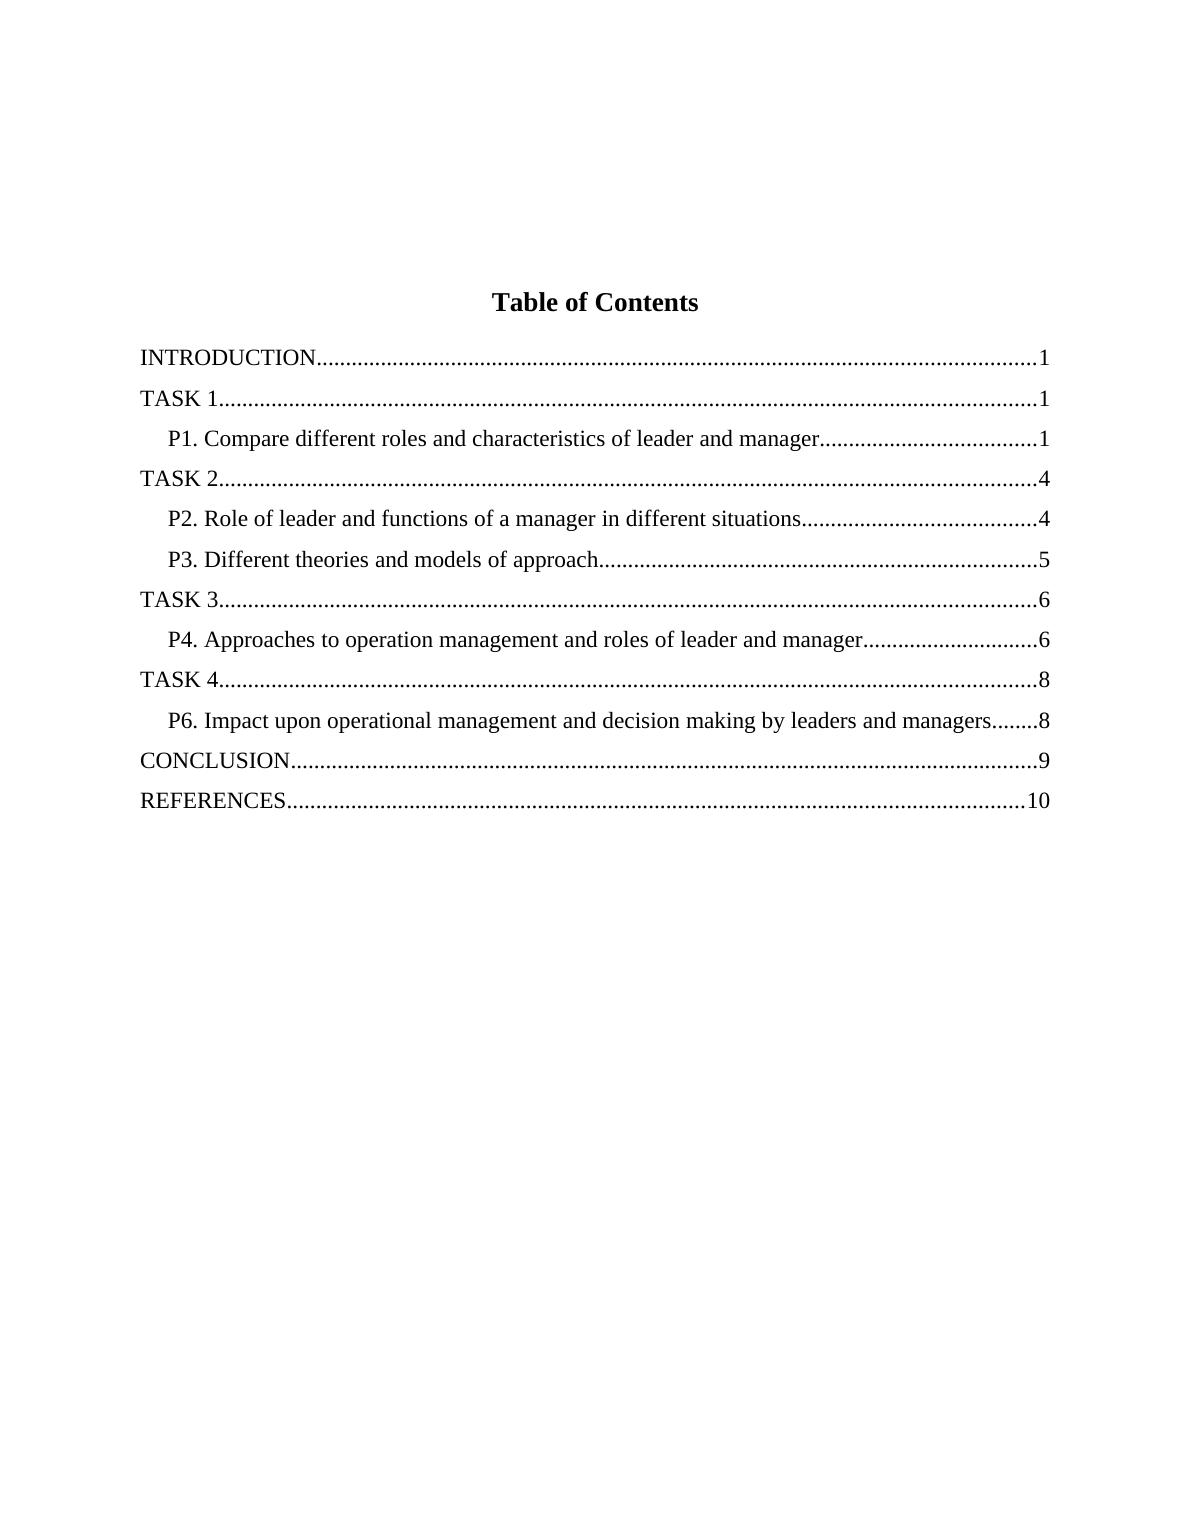 Management and Operations Assignment PDF : Mark and Spencer_2